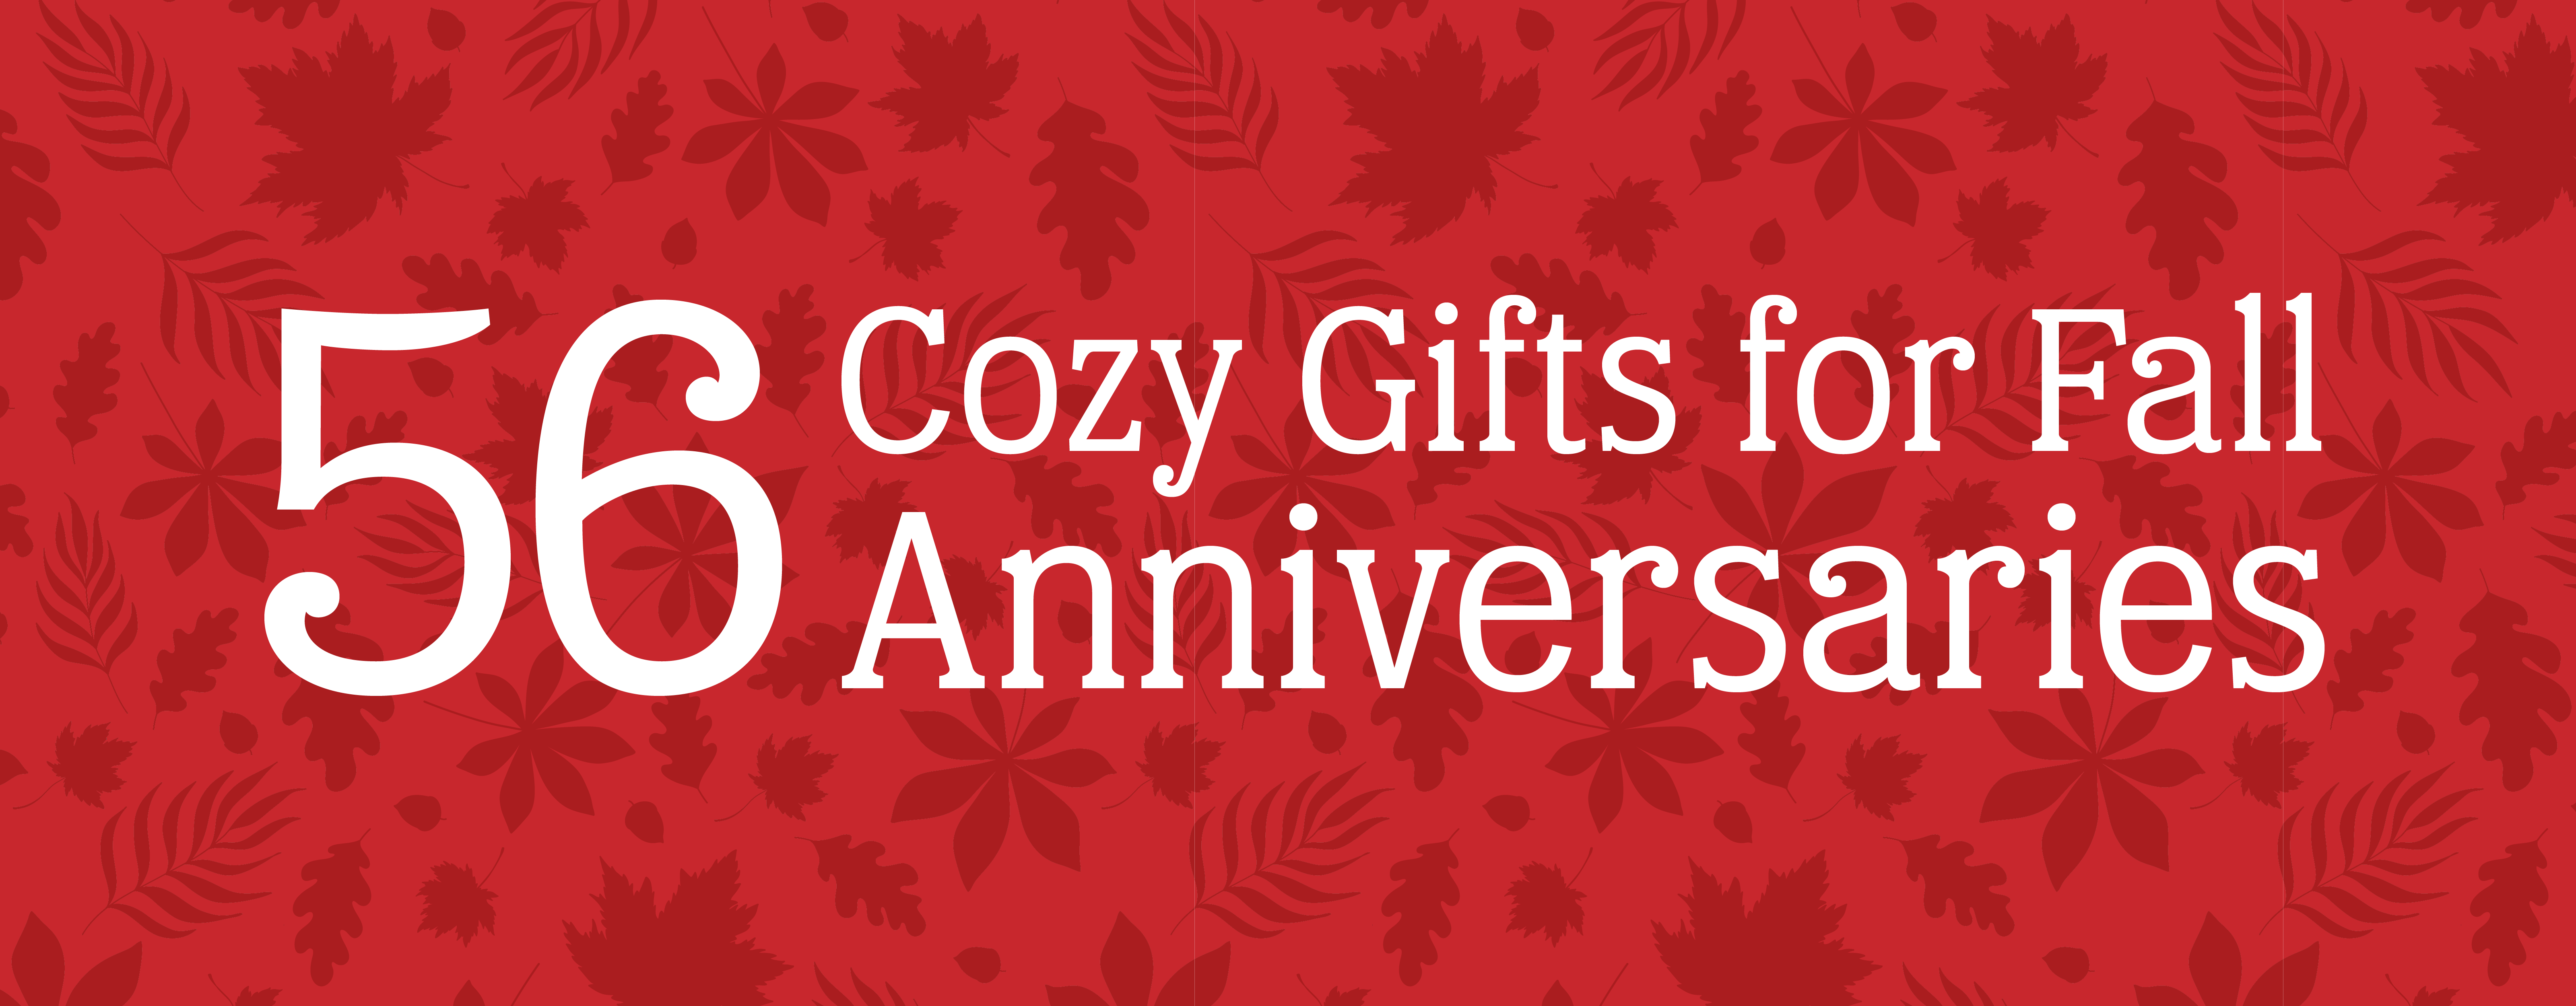 Falling leaves pattern on a red background with a white text overlay that reads "56 Cozy Gifts for Fall Anniversaries"